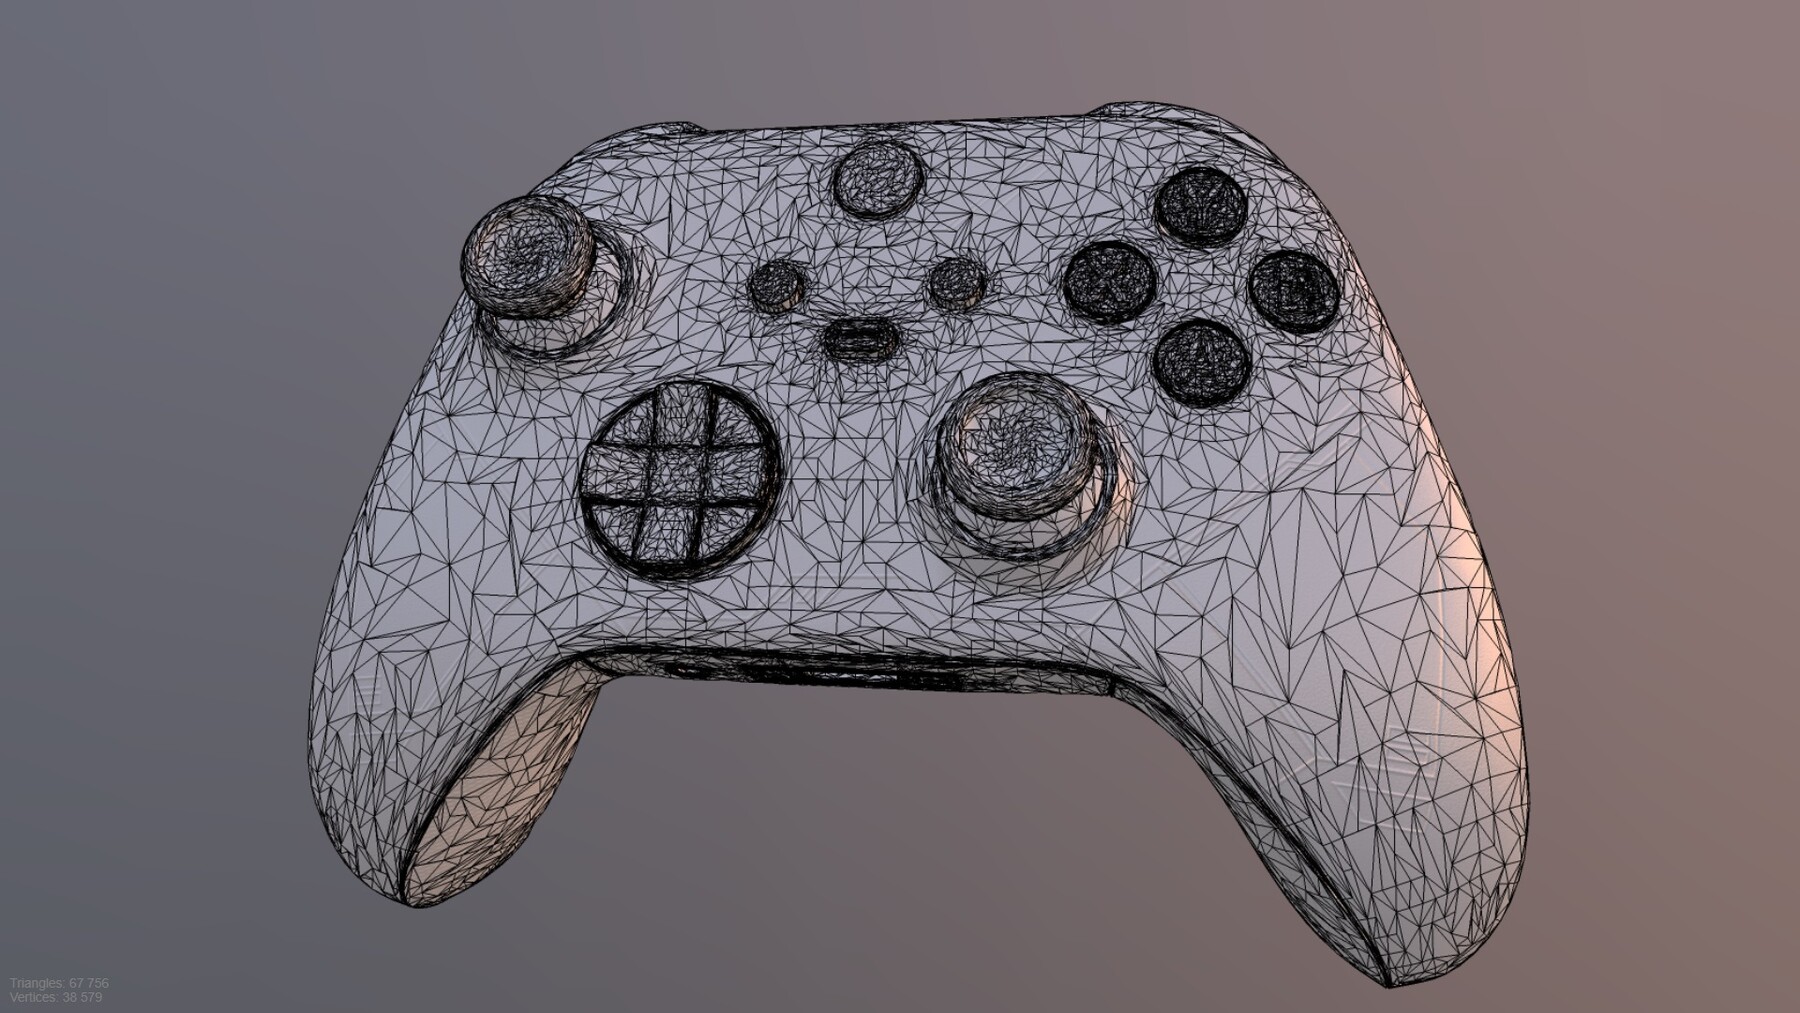 zbrush controllers